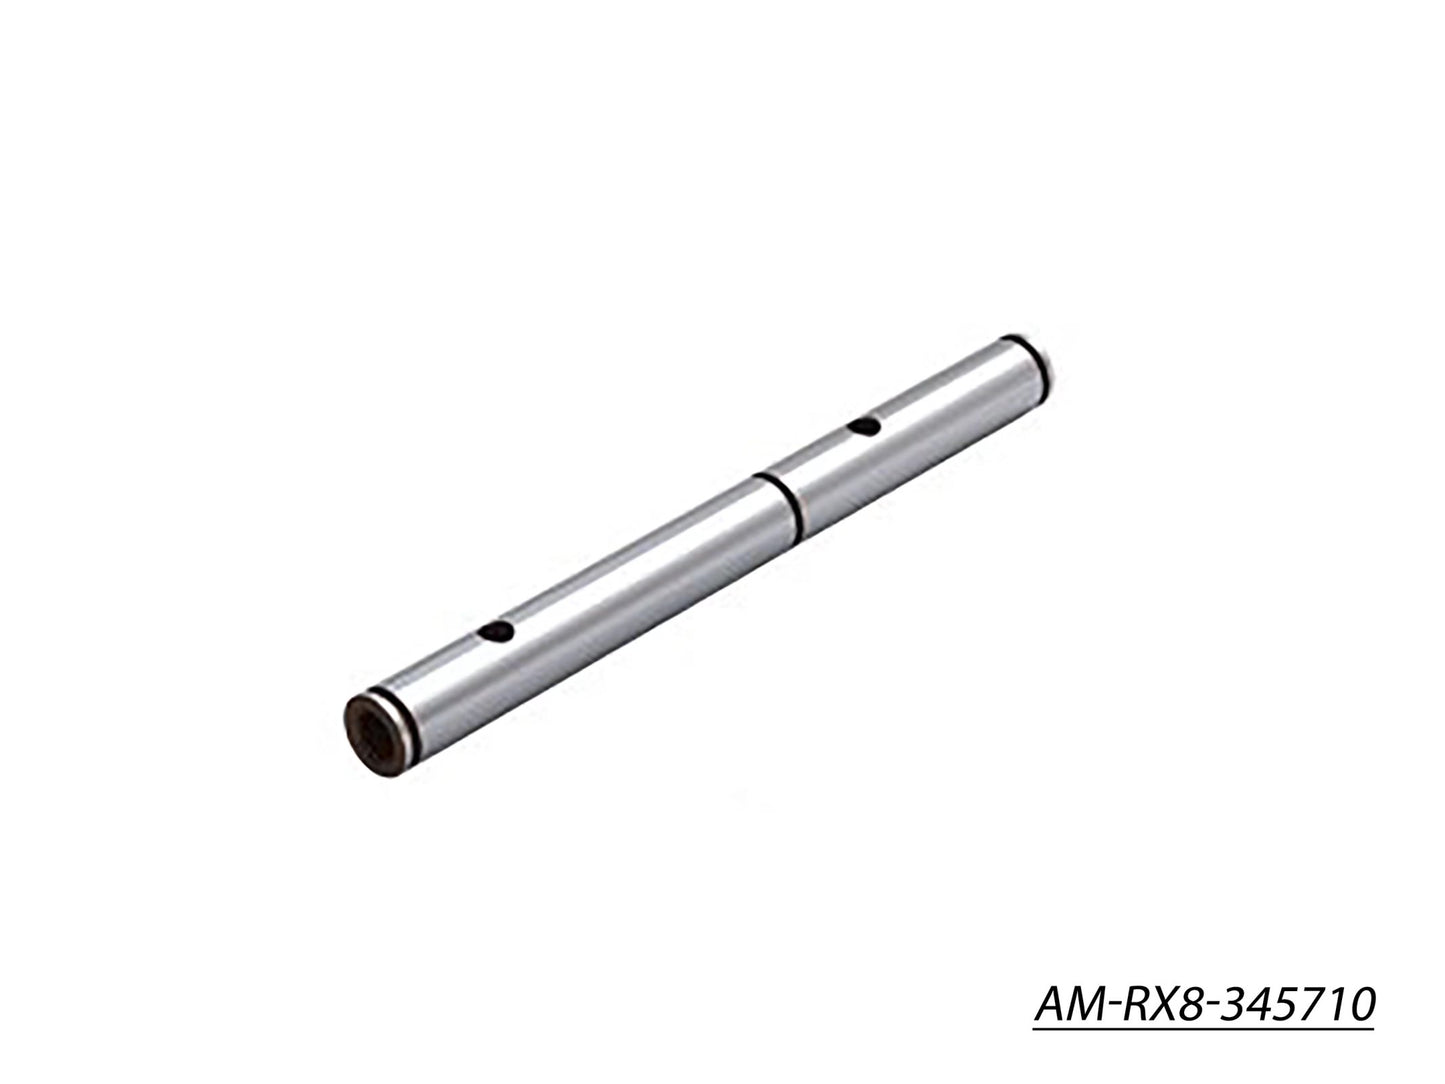 Front Middle Shaft (Spring Steel) (AM-RX8-345710)